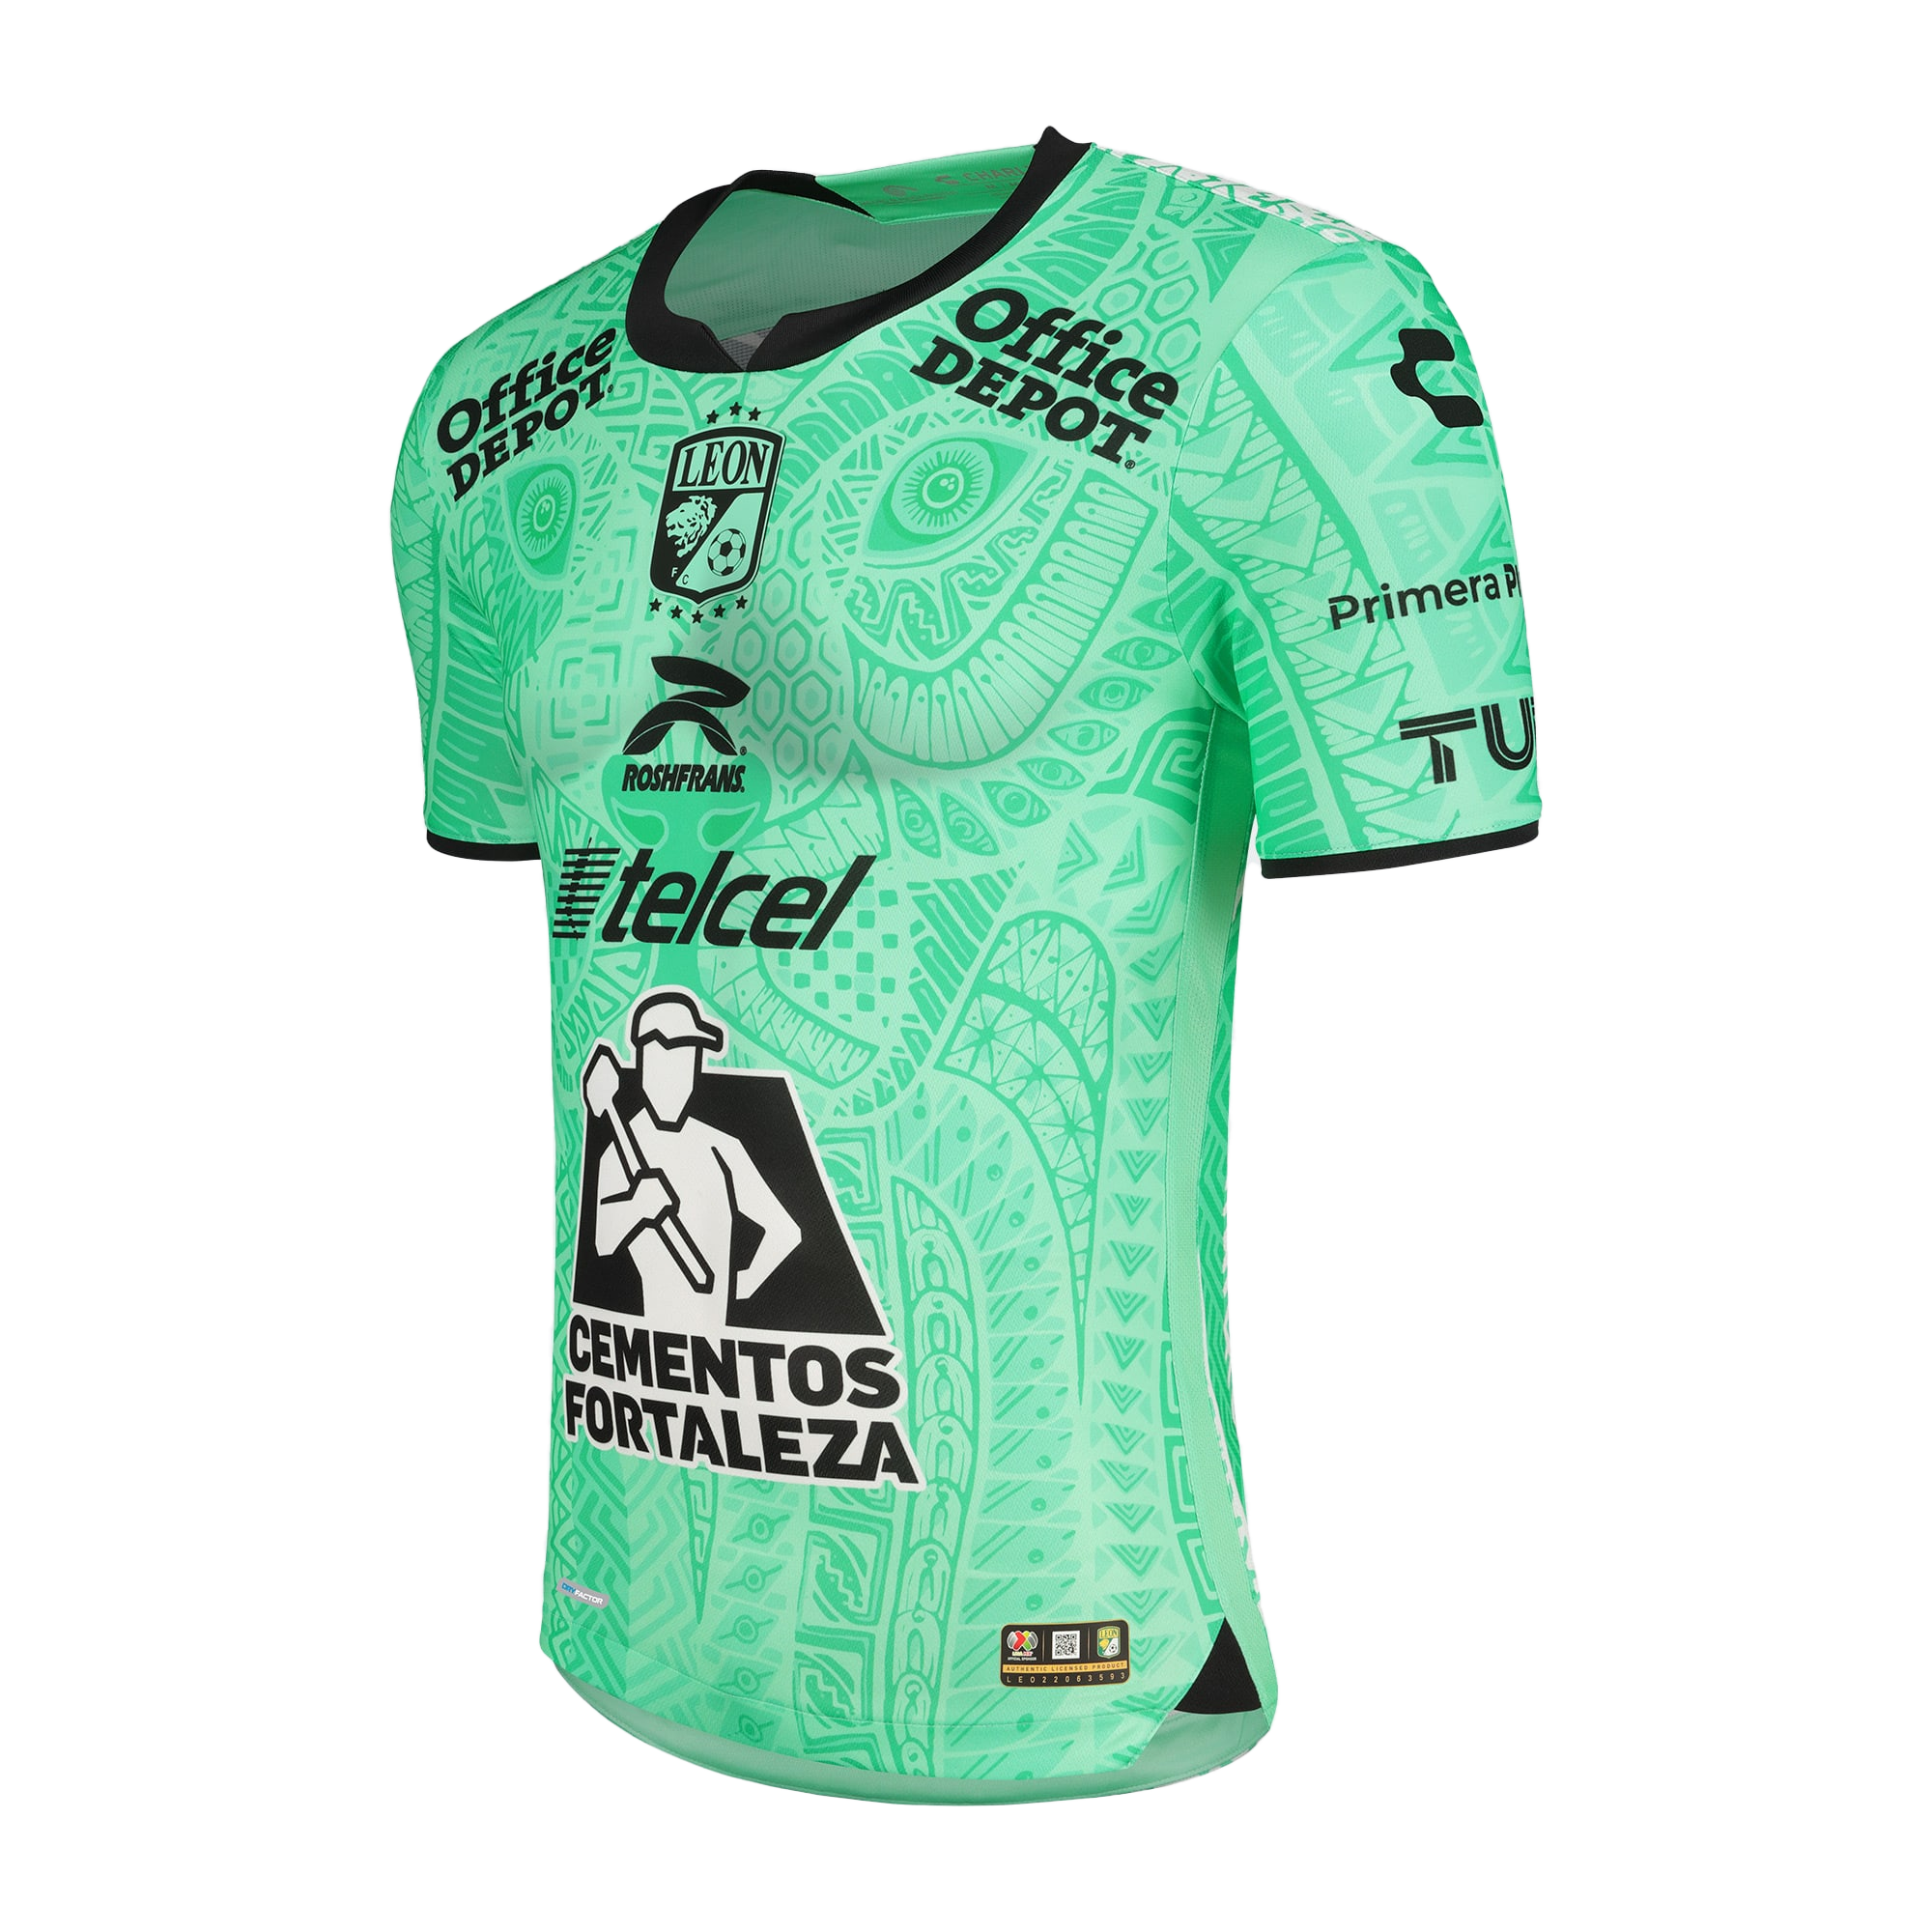 Charly Leon 22/23 3rd Jersey - Light Green